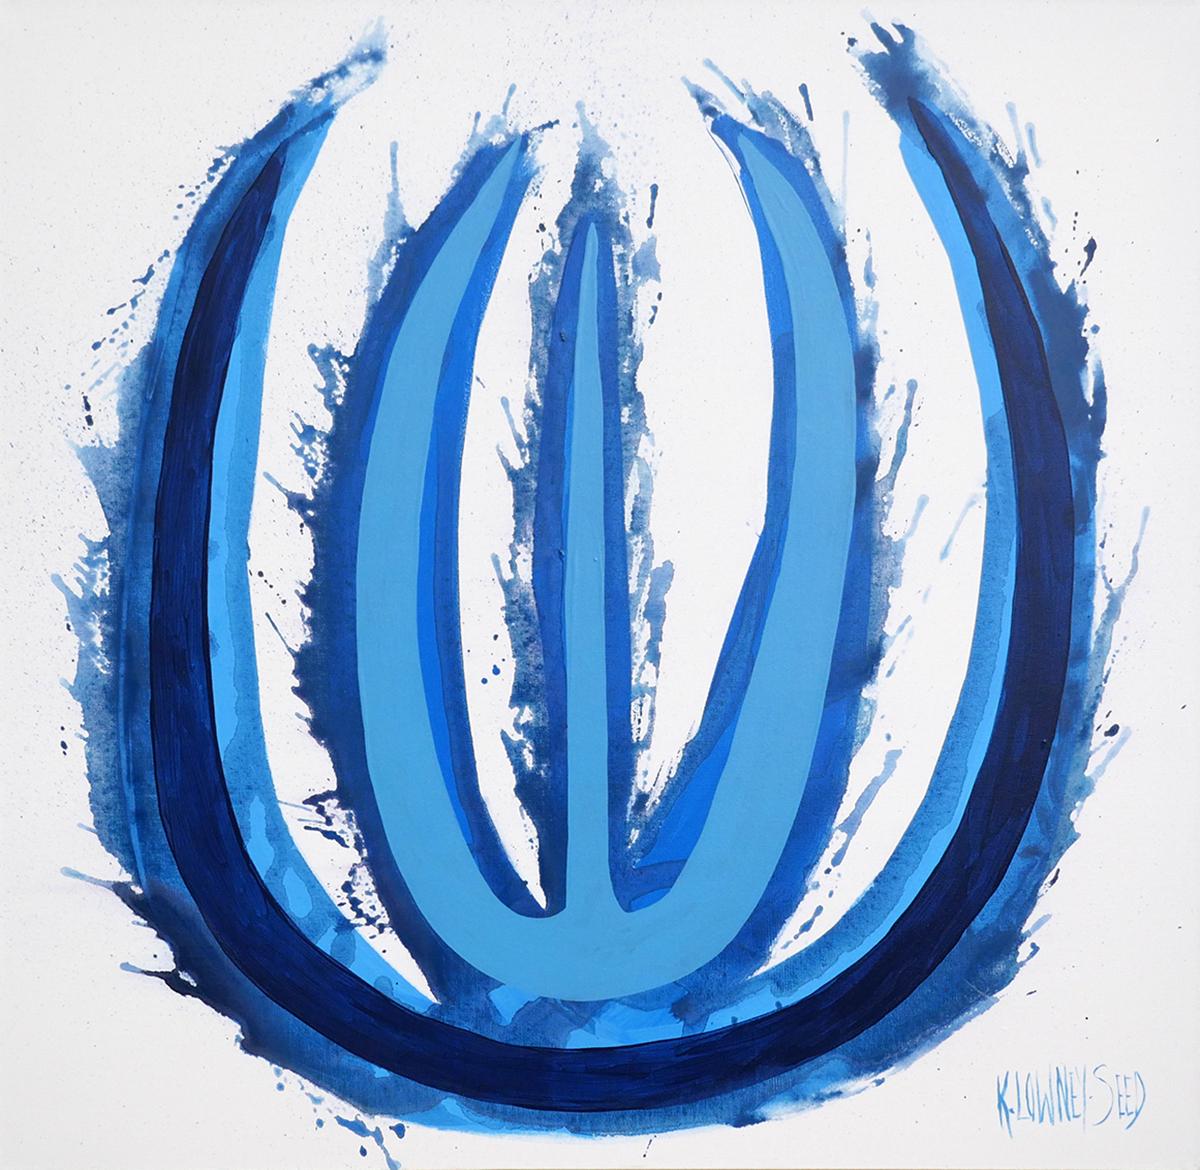 Karin Lowney-Seed Abstract Painting - Blue Dynamite Tulip, Painting, Acrylic on Canvas